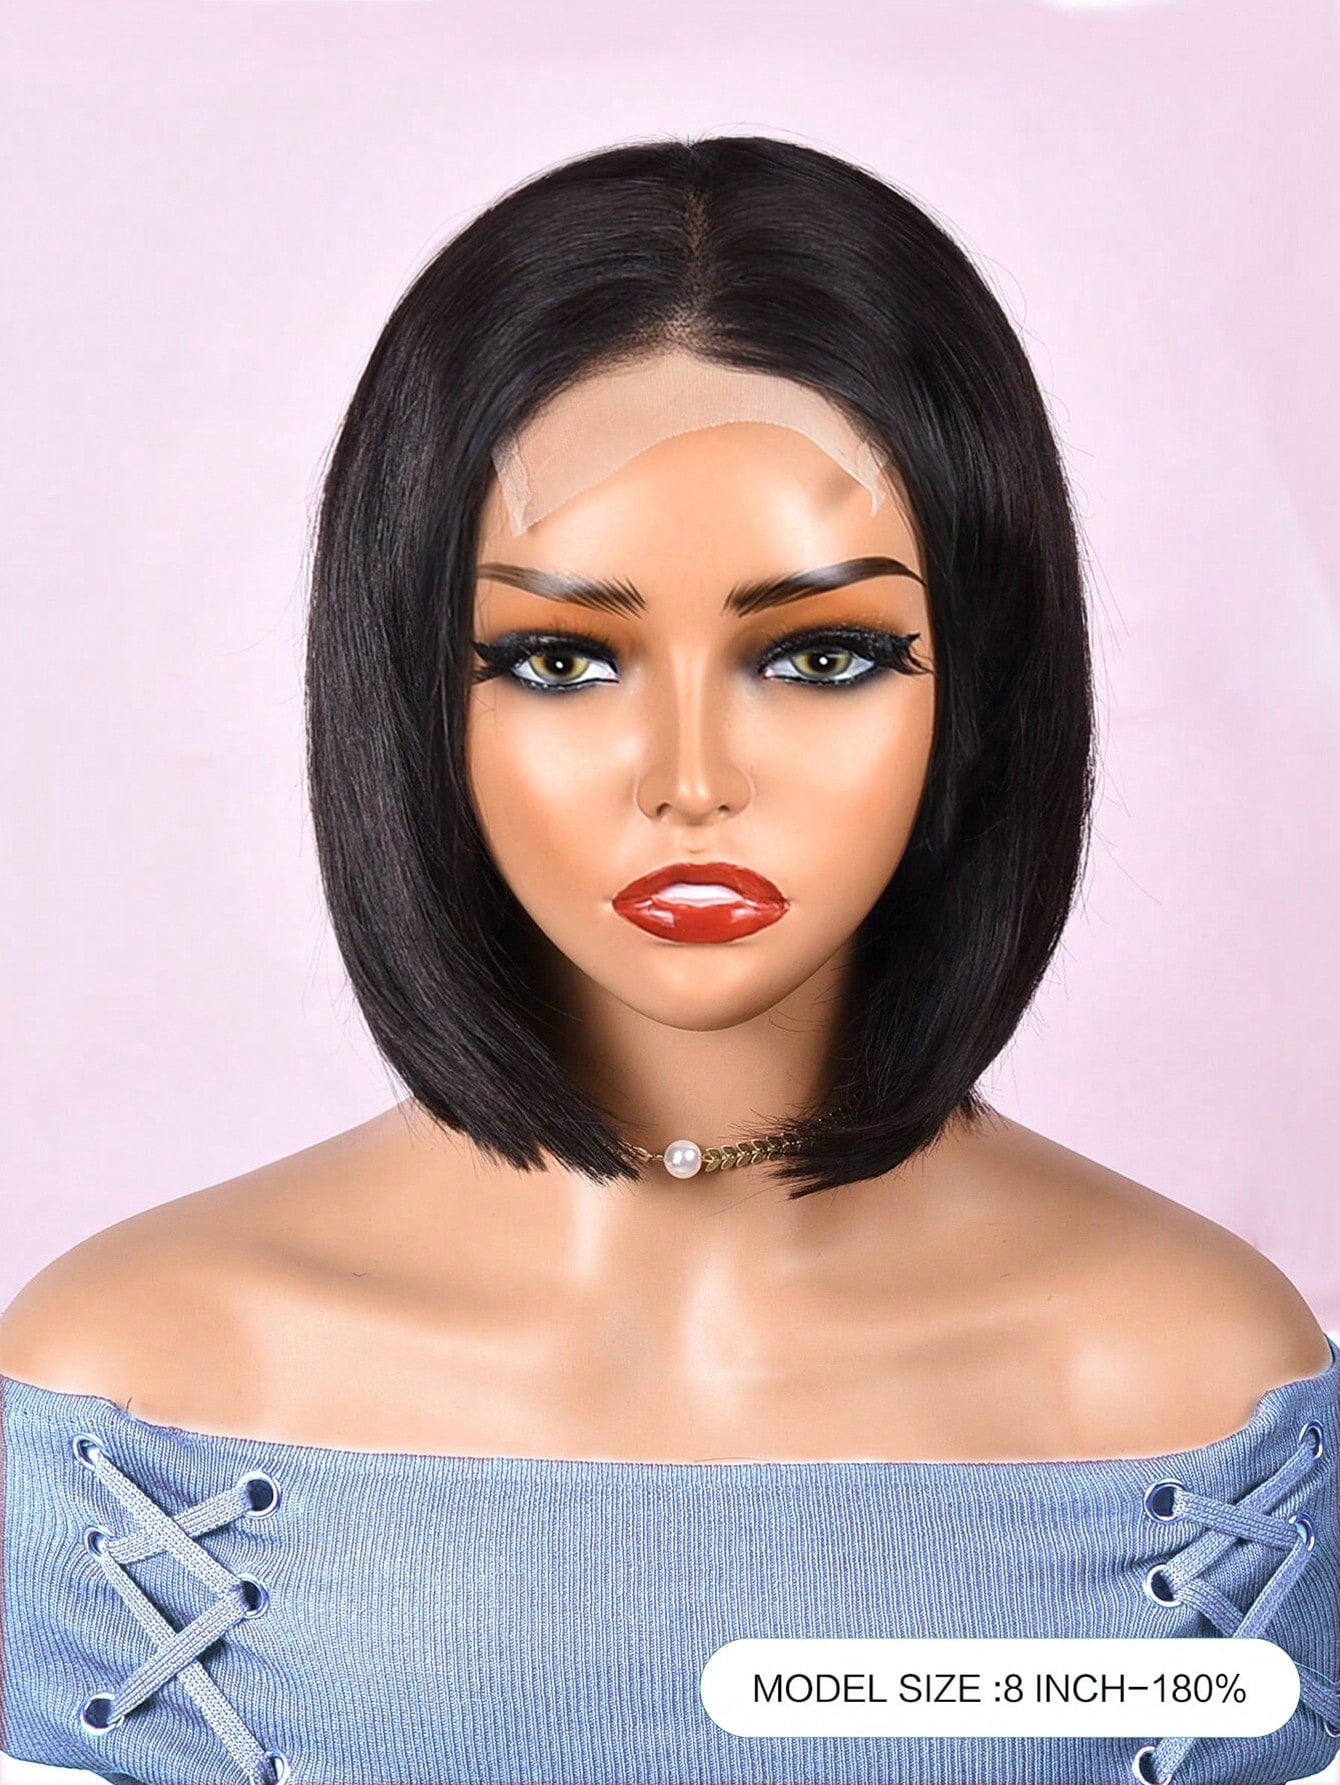 Transparent Lace Short Straight Bob 4 X 4 Lace Closure Wigs 150%/180% Density 8 Inch Natural Black Color Pre-Plucked Natural Hairline  Lace Remy Hair Human Hair Top Quality Wigs For Women